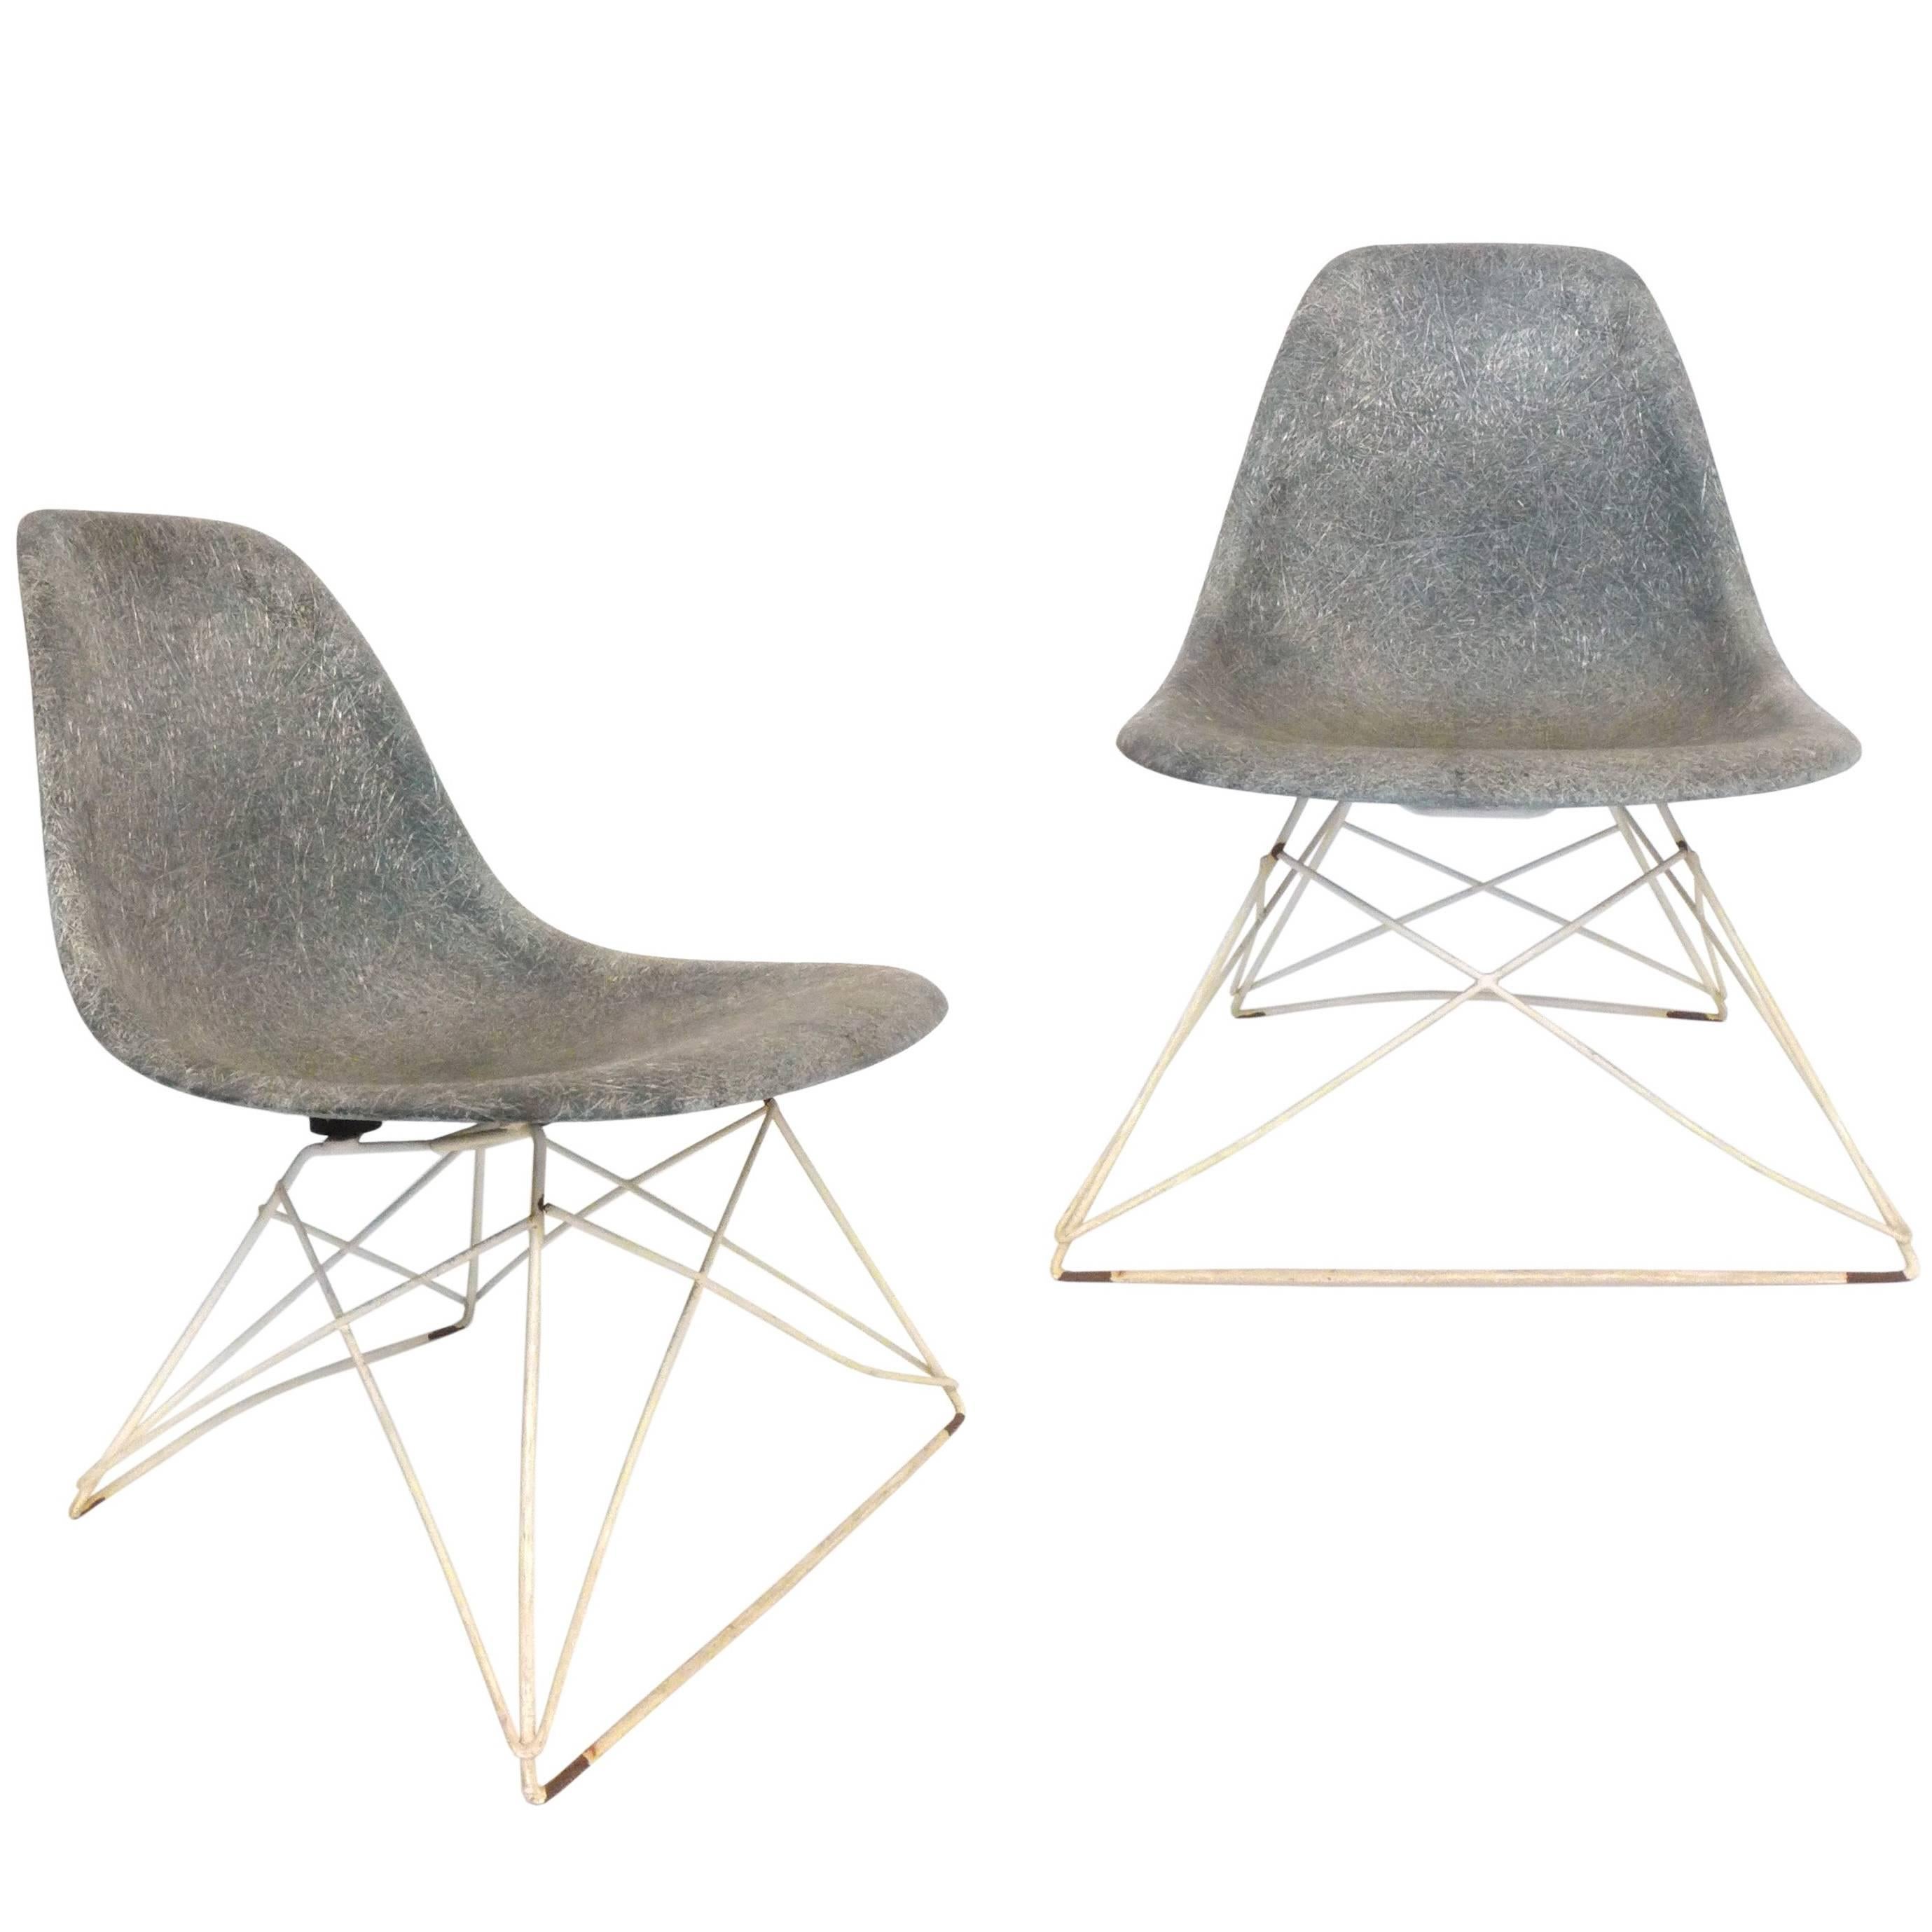 Pair of Low Cat's Cradle Side Chairs by Charles and Ray Eames for Herman Miller